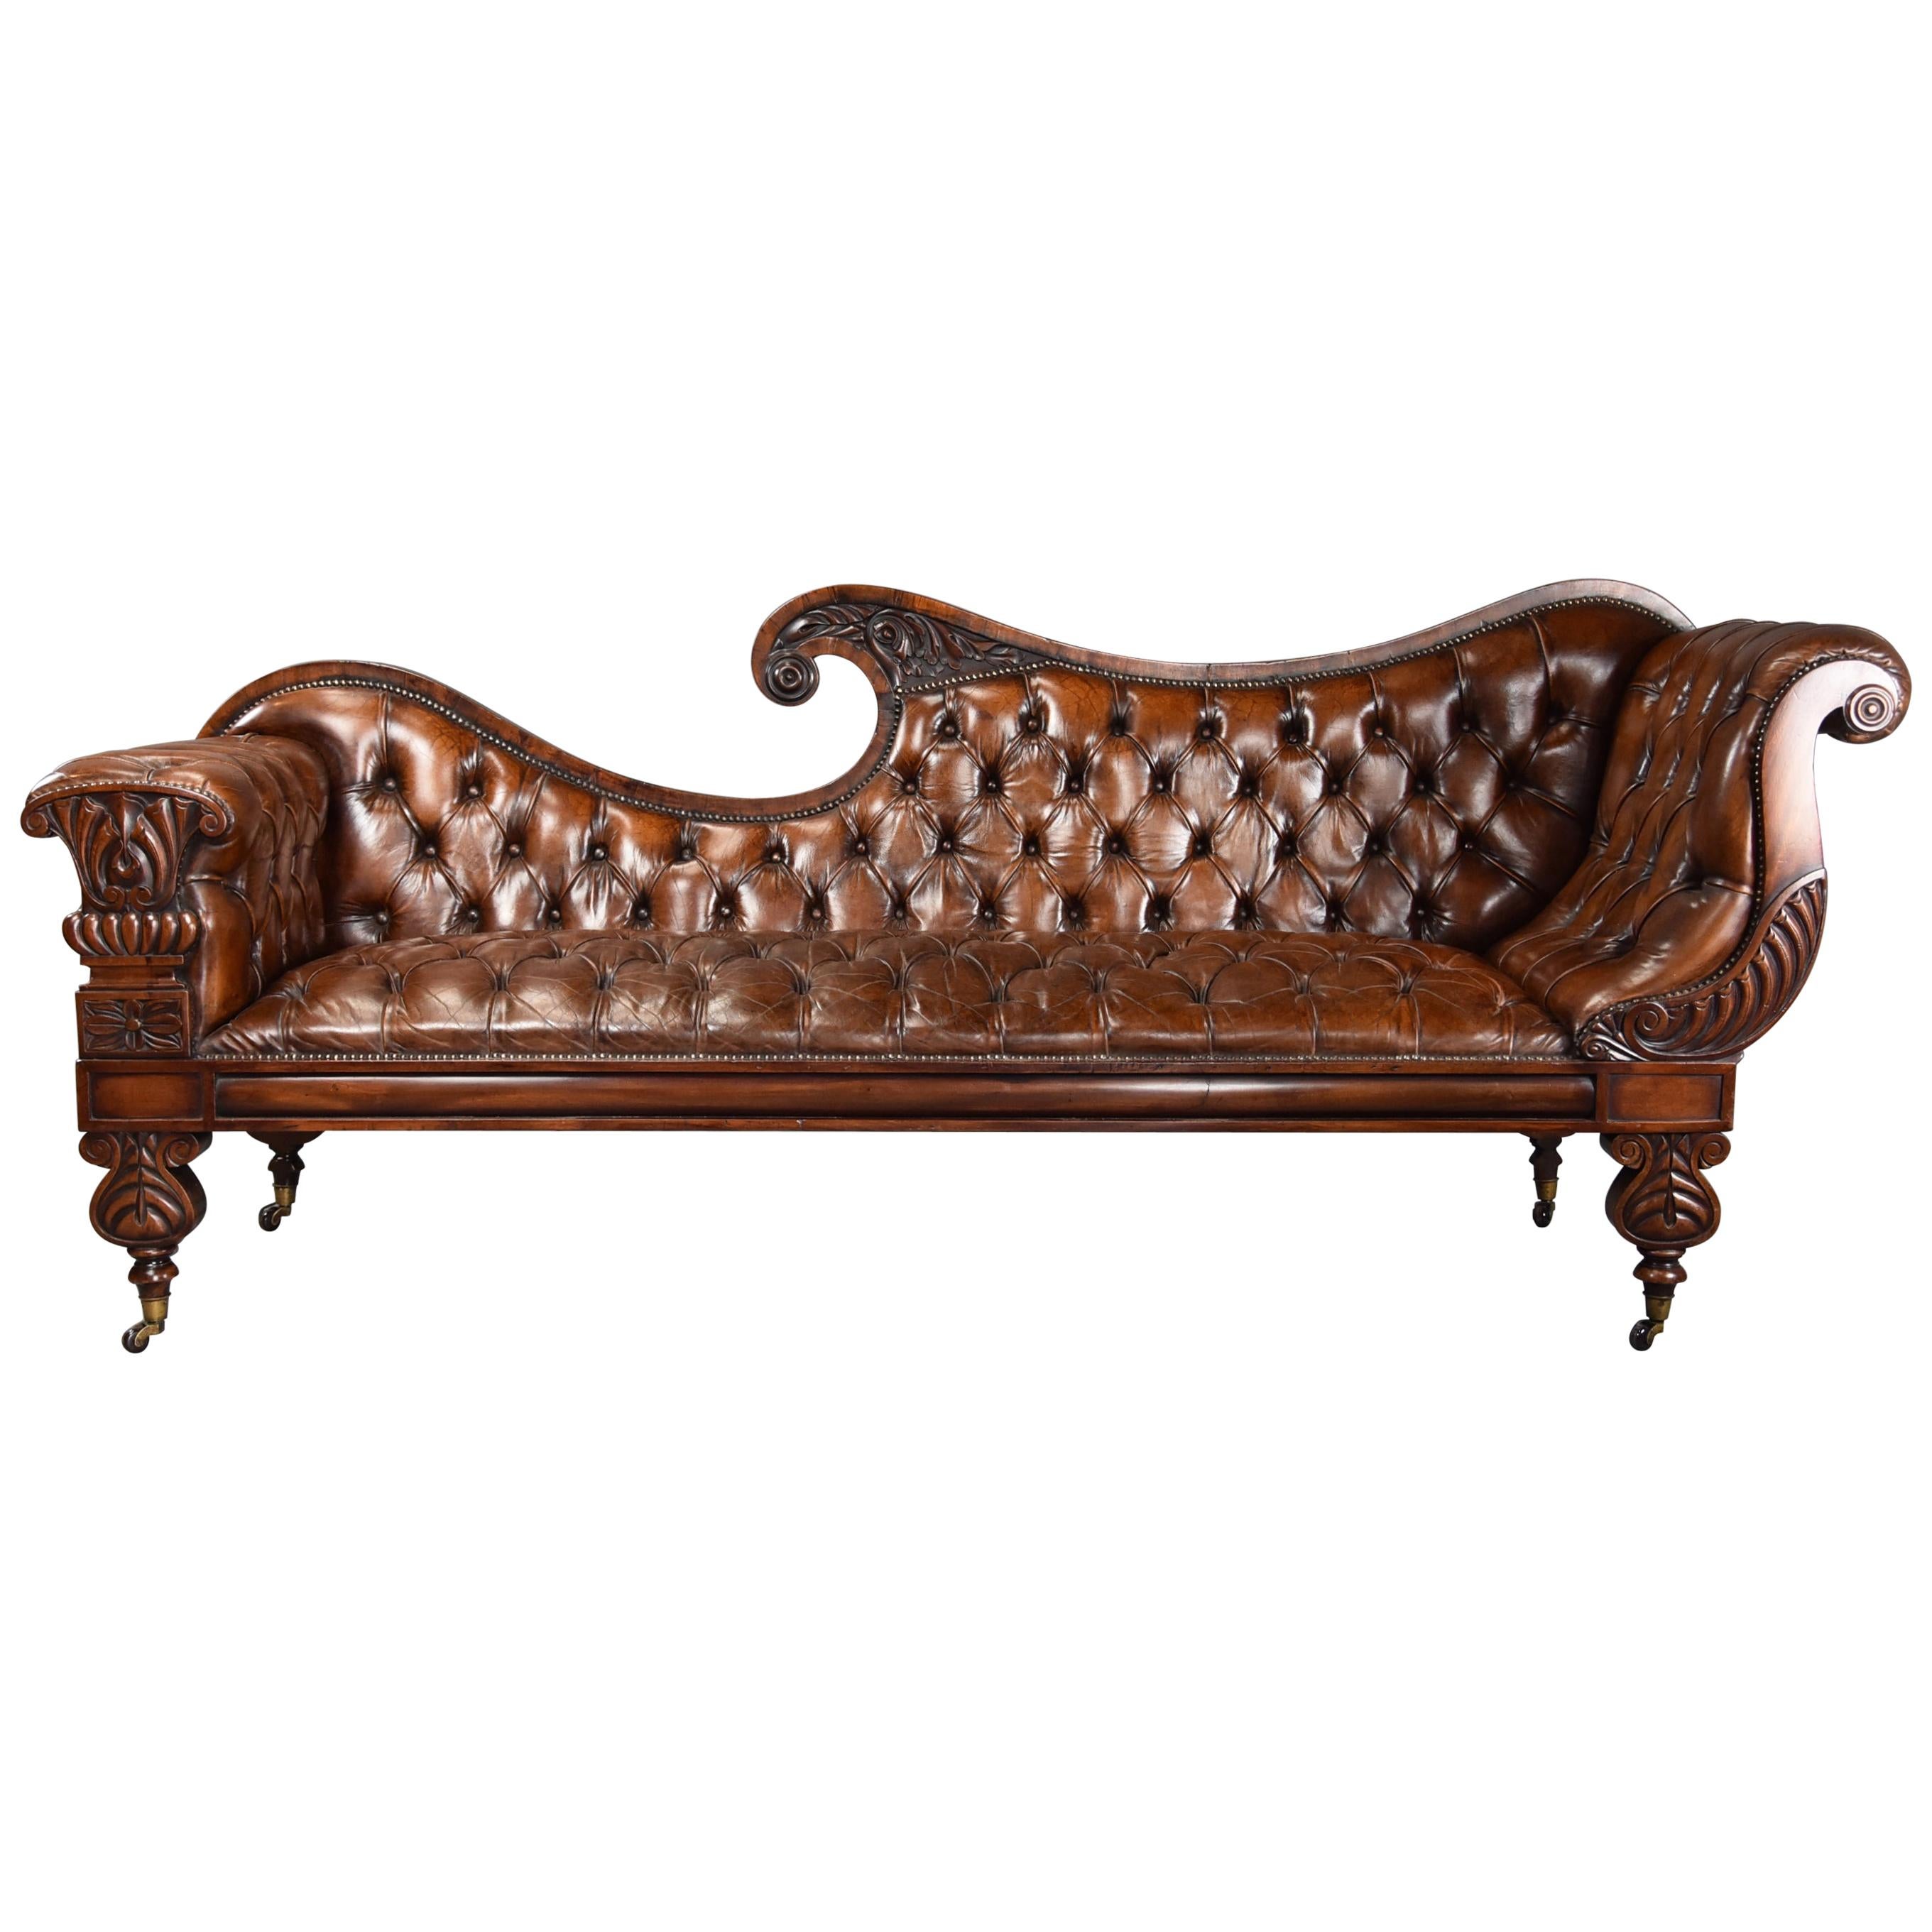 Superb Late Regency/William IV Mahogany Deep Buttoned Brown Leather Sofa For Sale